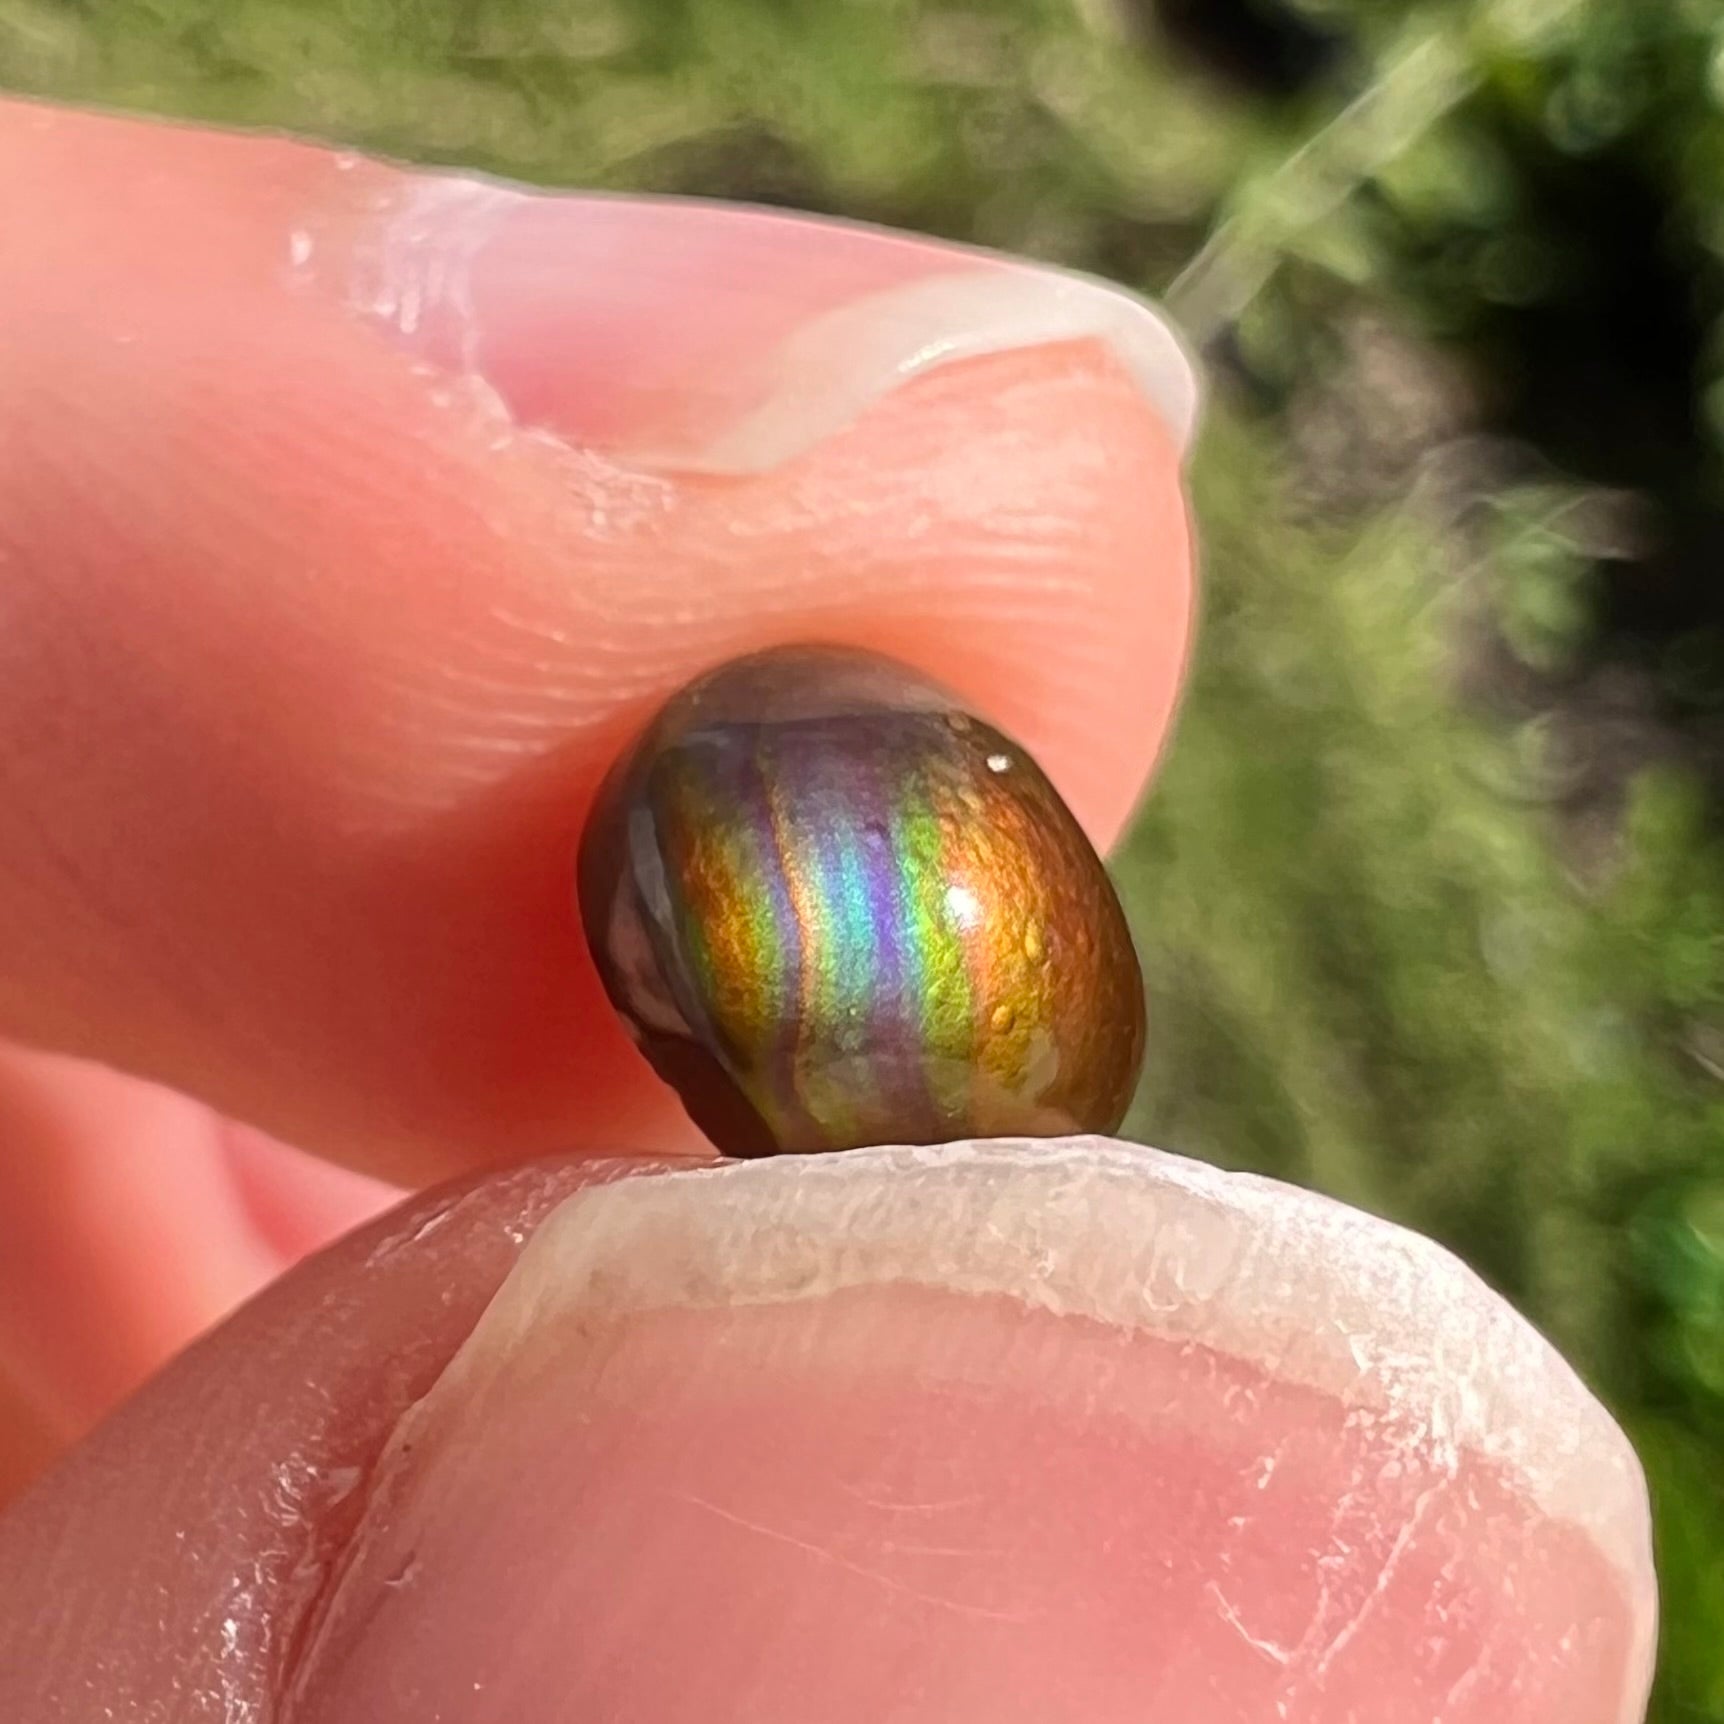 A 1.69ct round cabochon cut Mexican fire agate stone.  The stone is red with purple and green swirls.